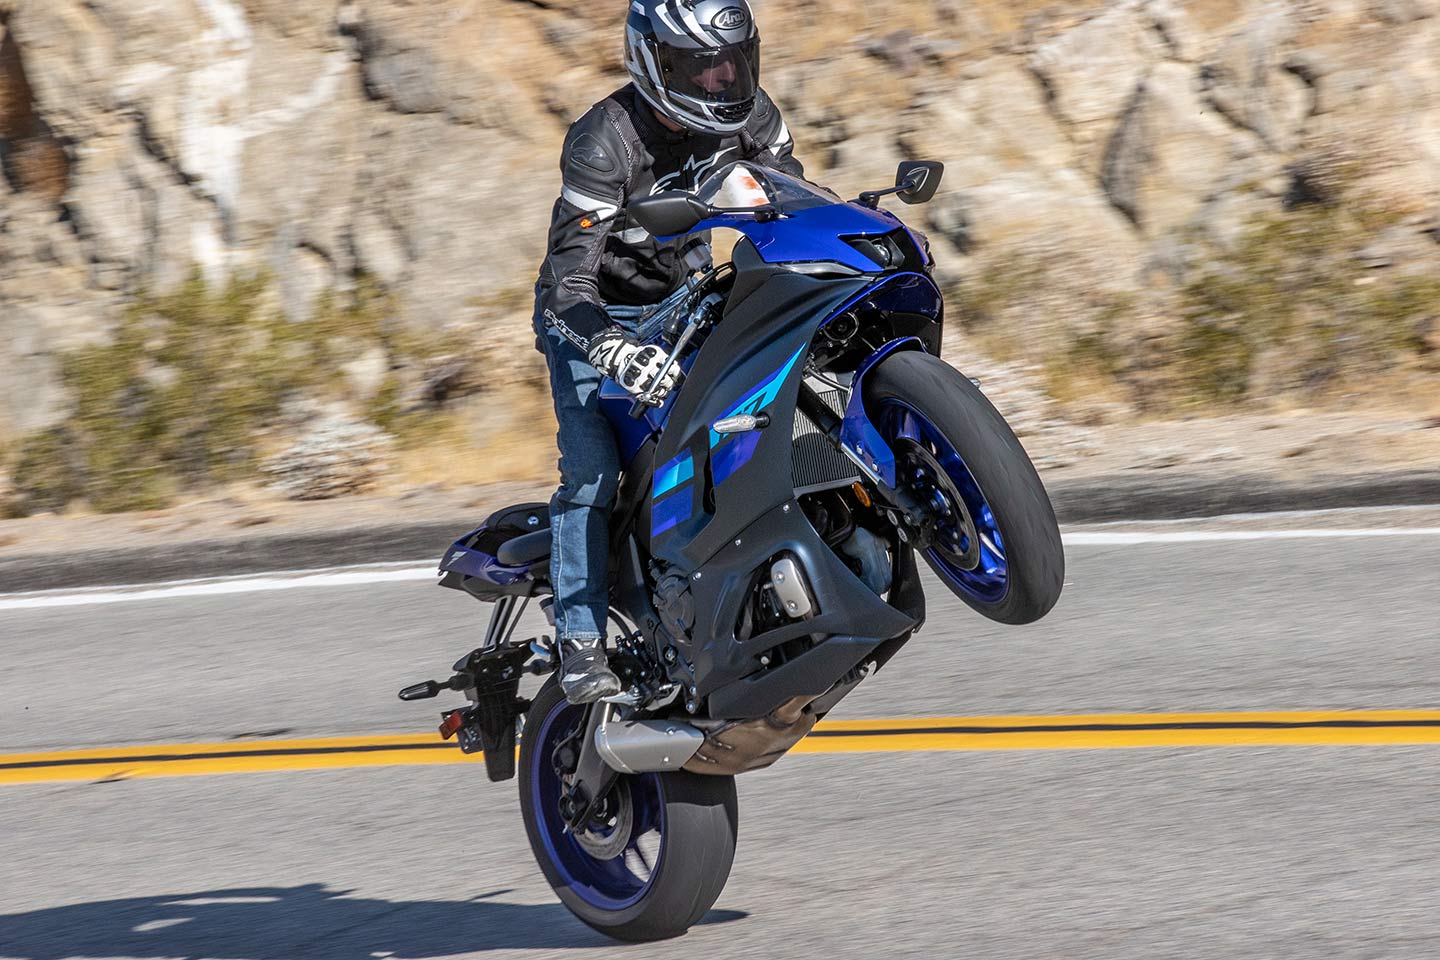 The Yamaha’s engine delivers more than enough performance for fun.